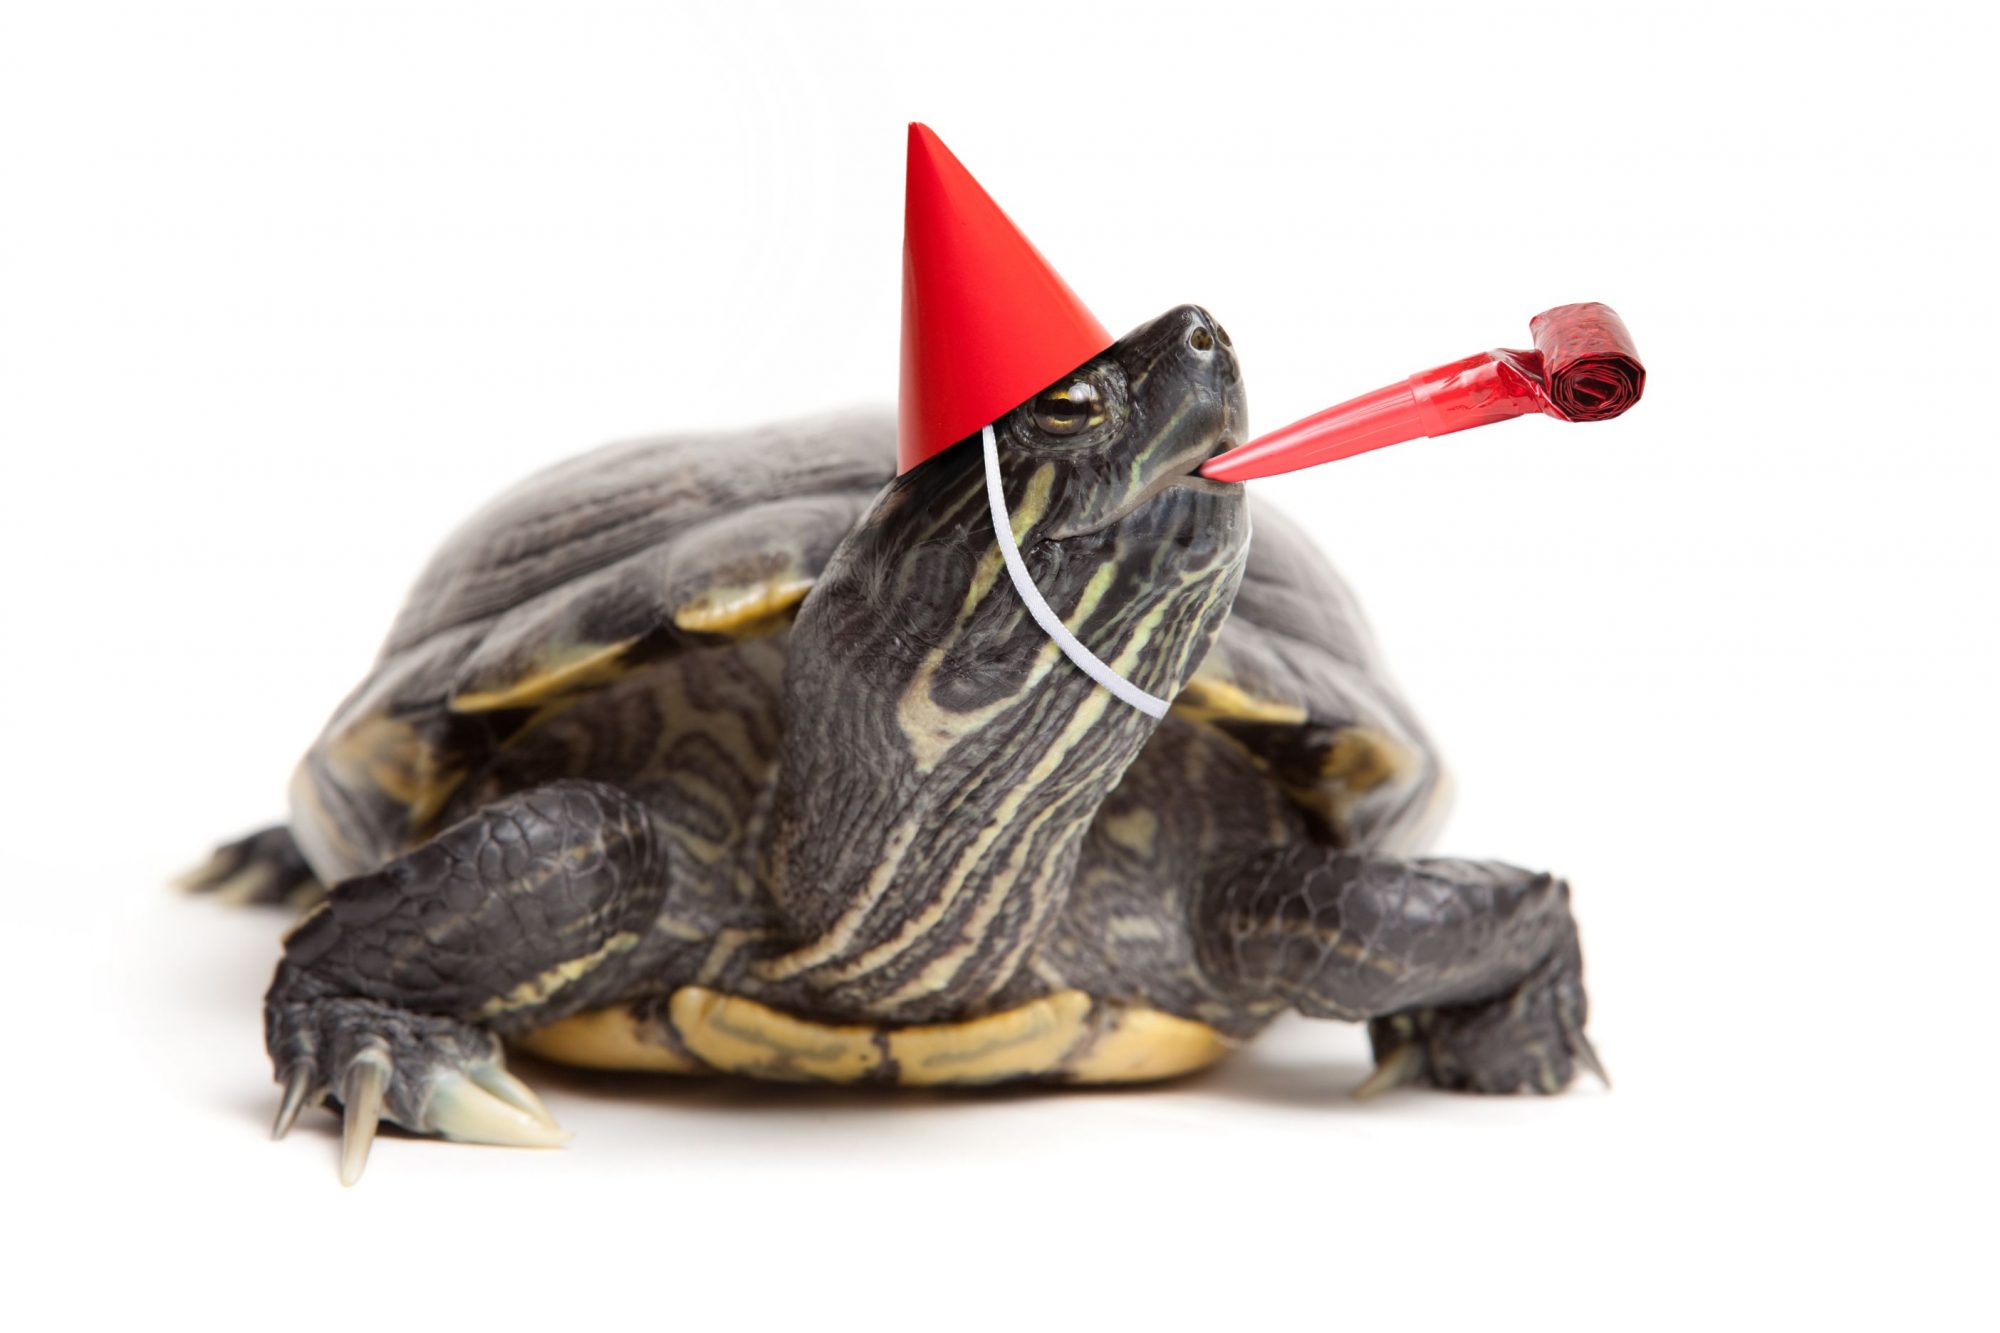 Turtle at a party.